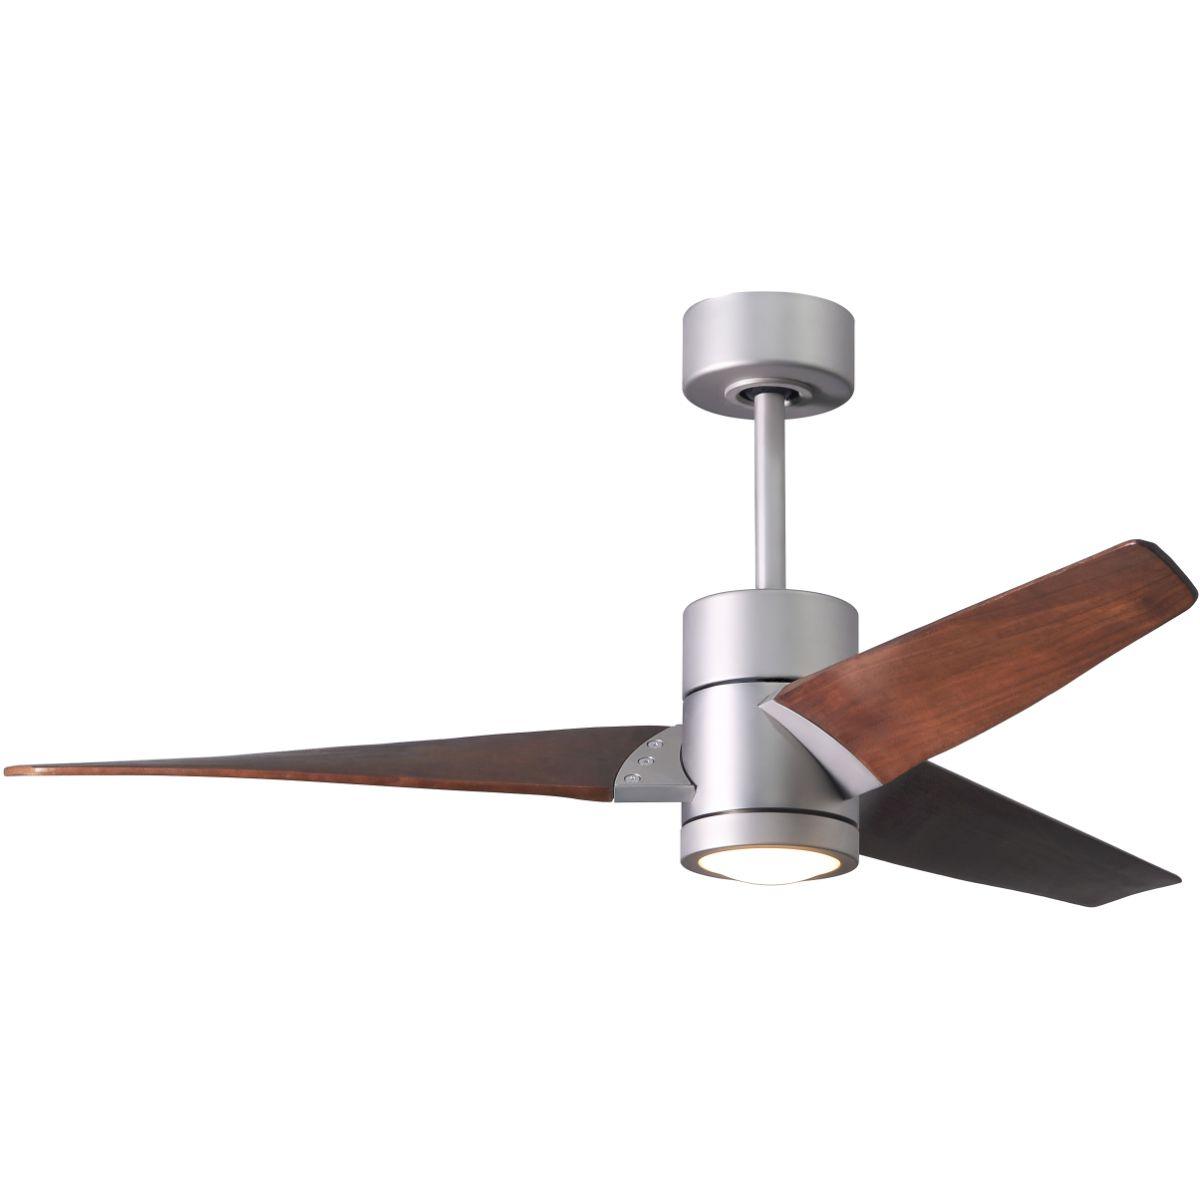 Super Janet 52 Inch Outdoor Ceiling Fan With Light, Wall And Remote Control Included - Bees Lighting